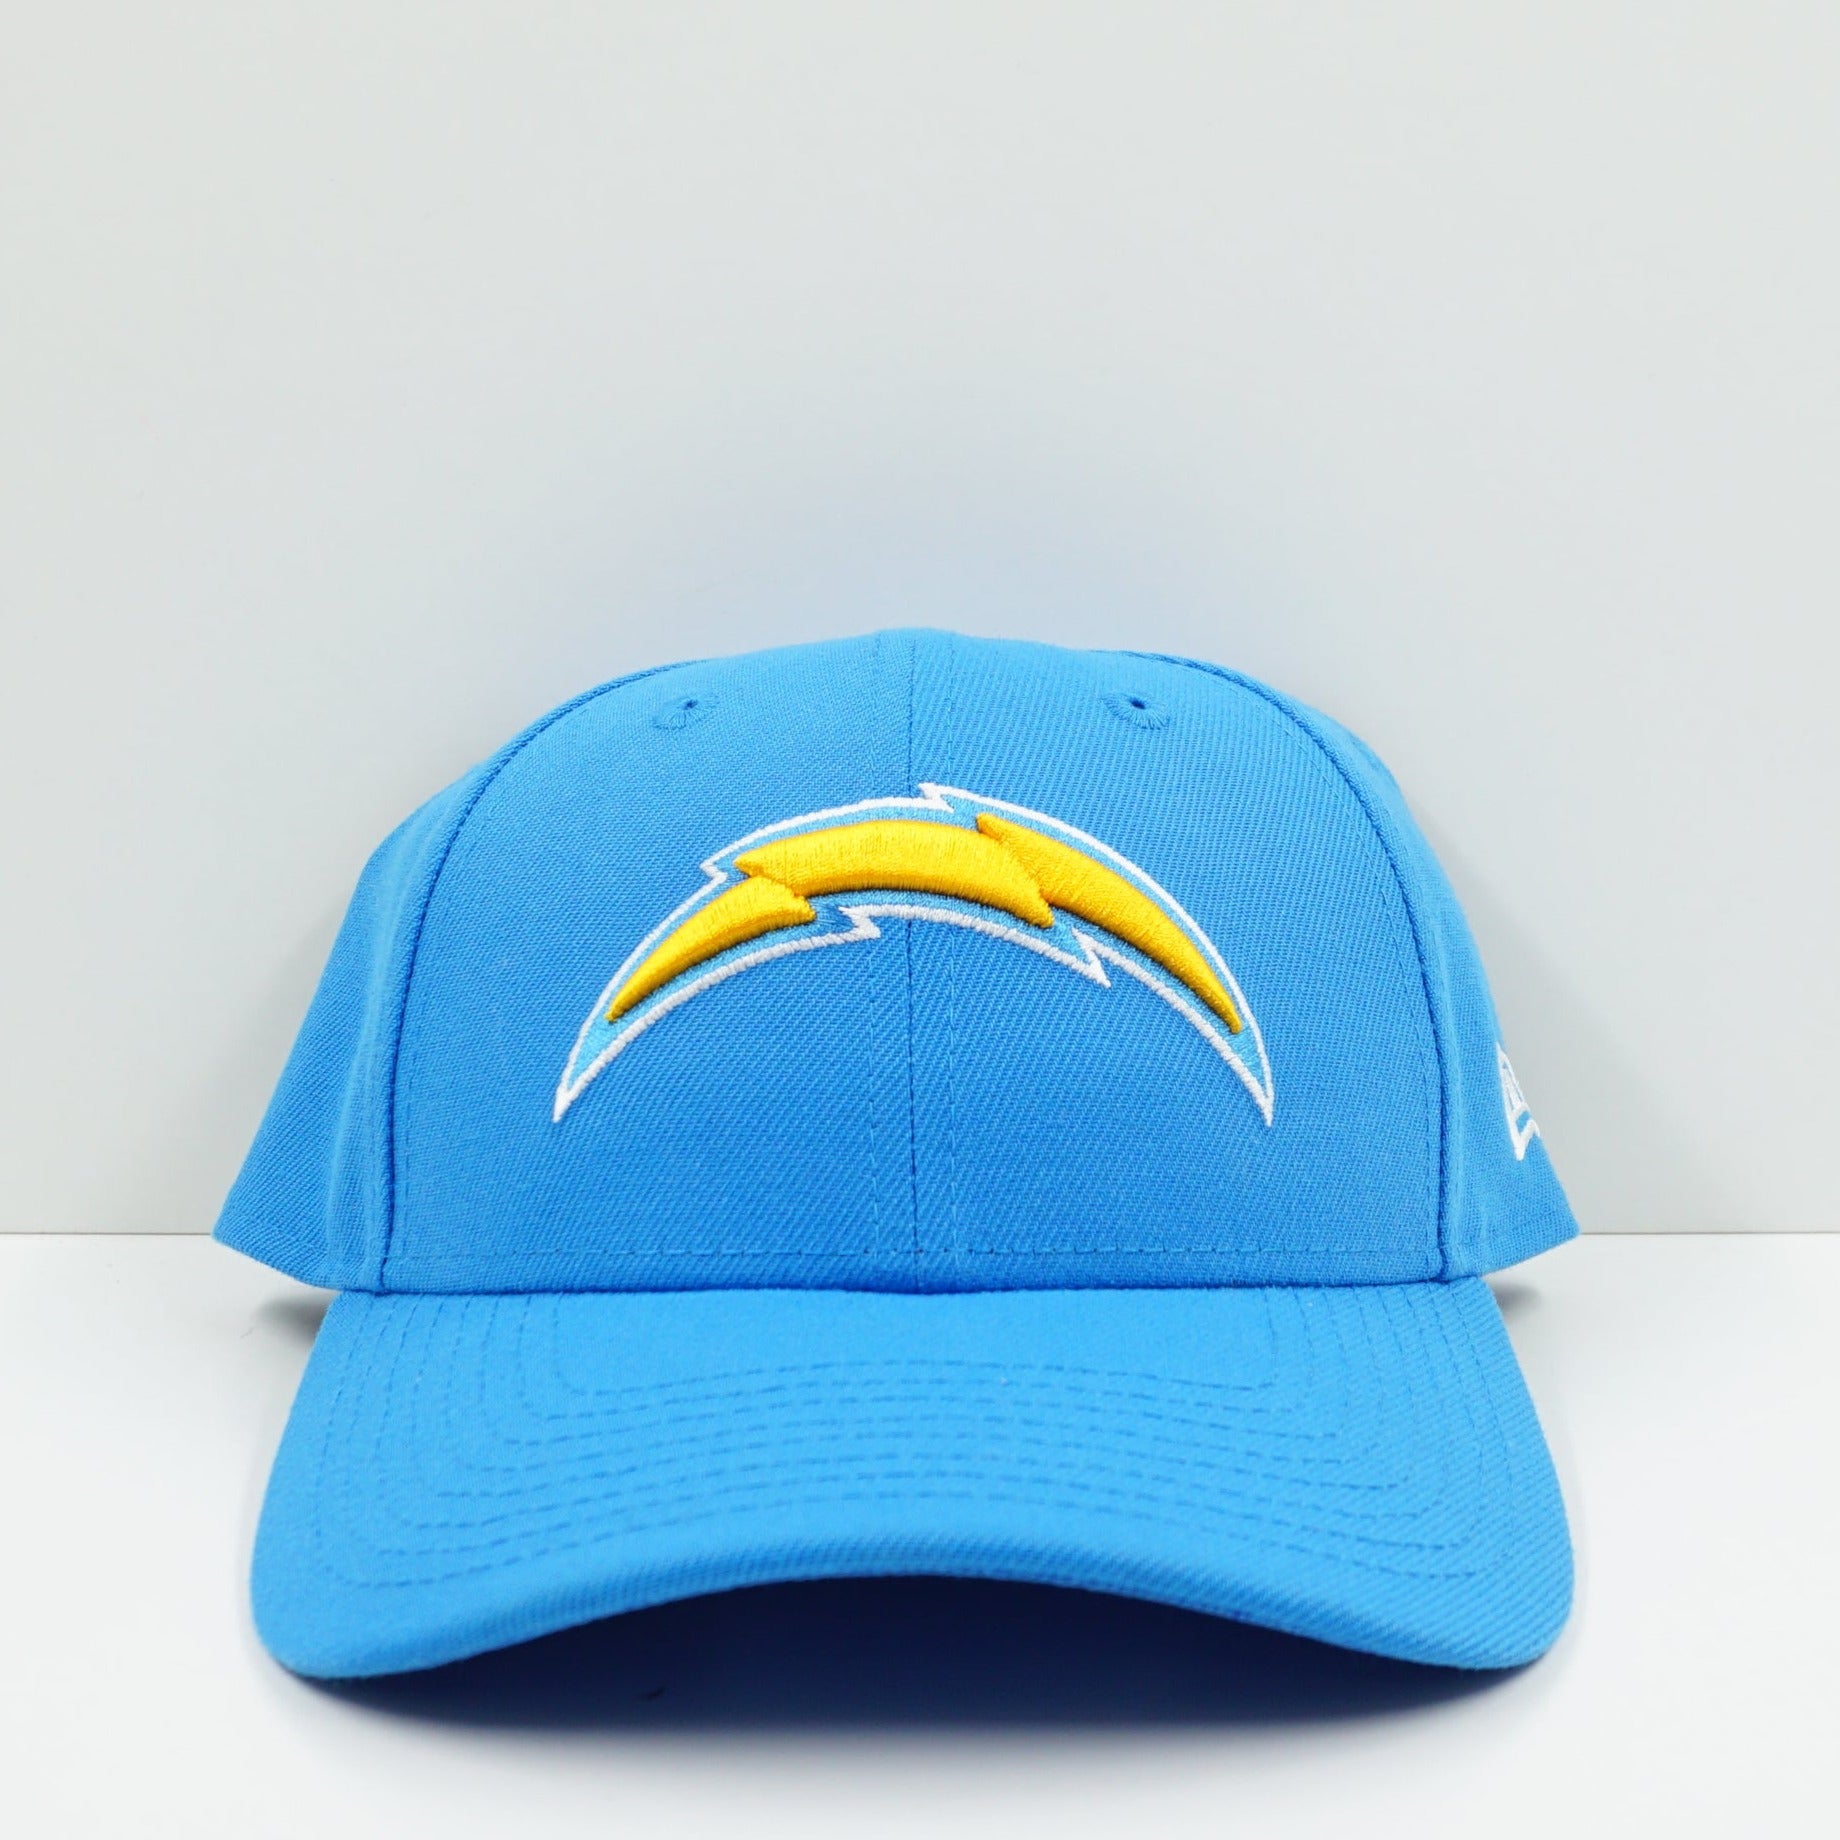 Los Angeles Chargers Adjustable Cap